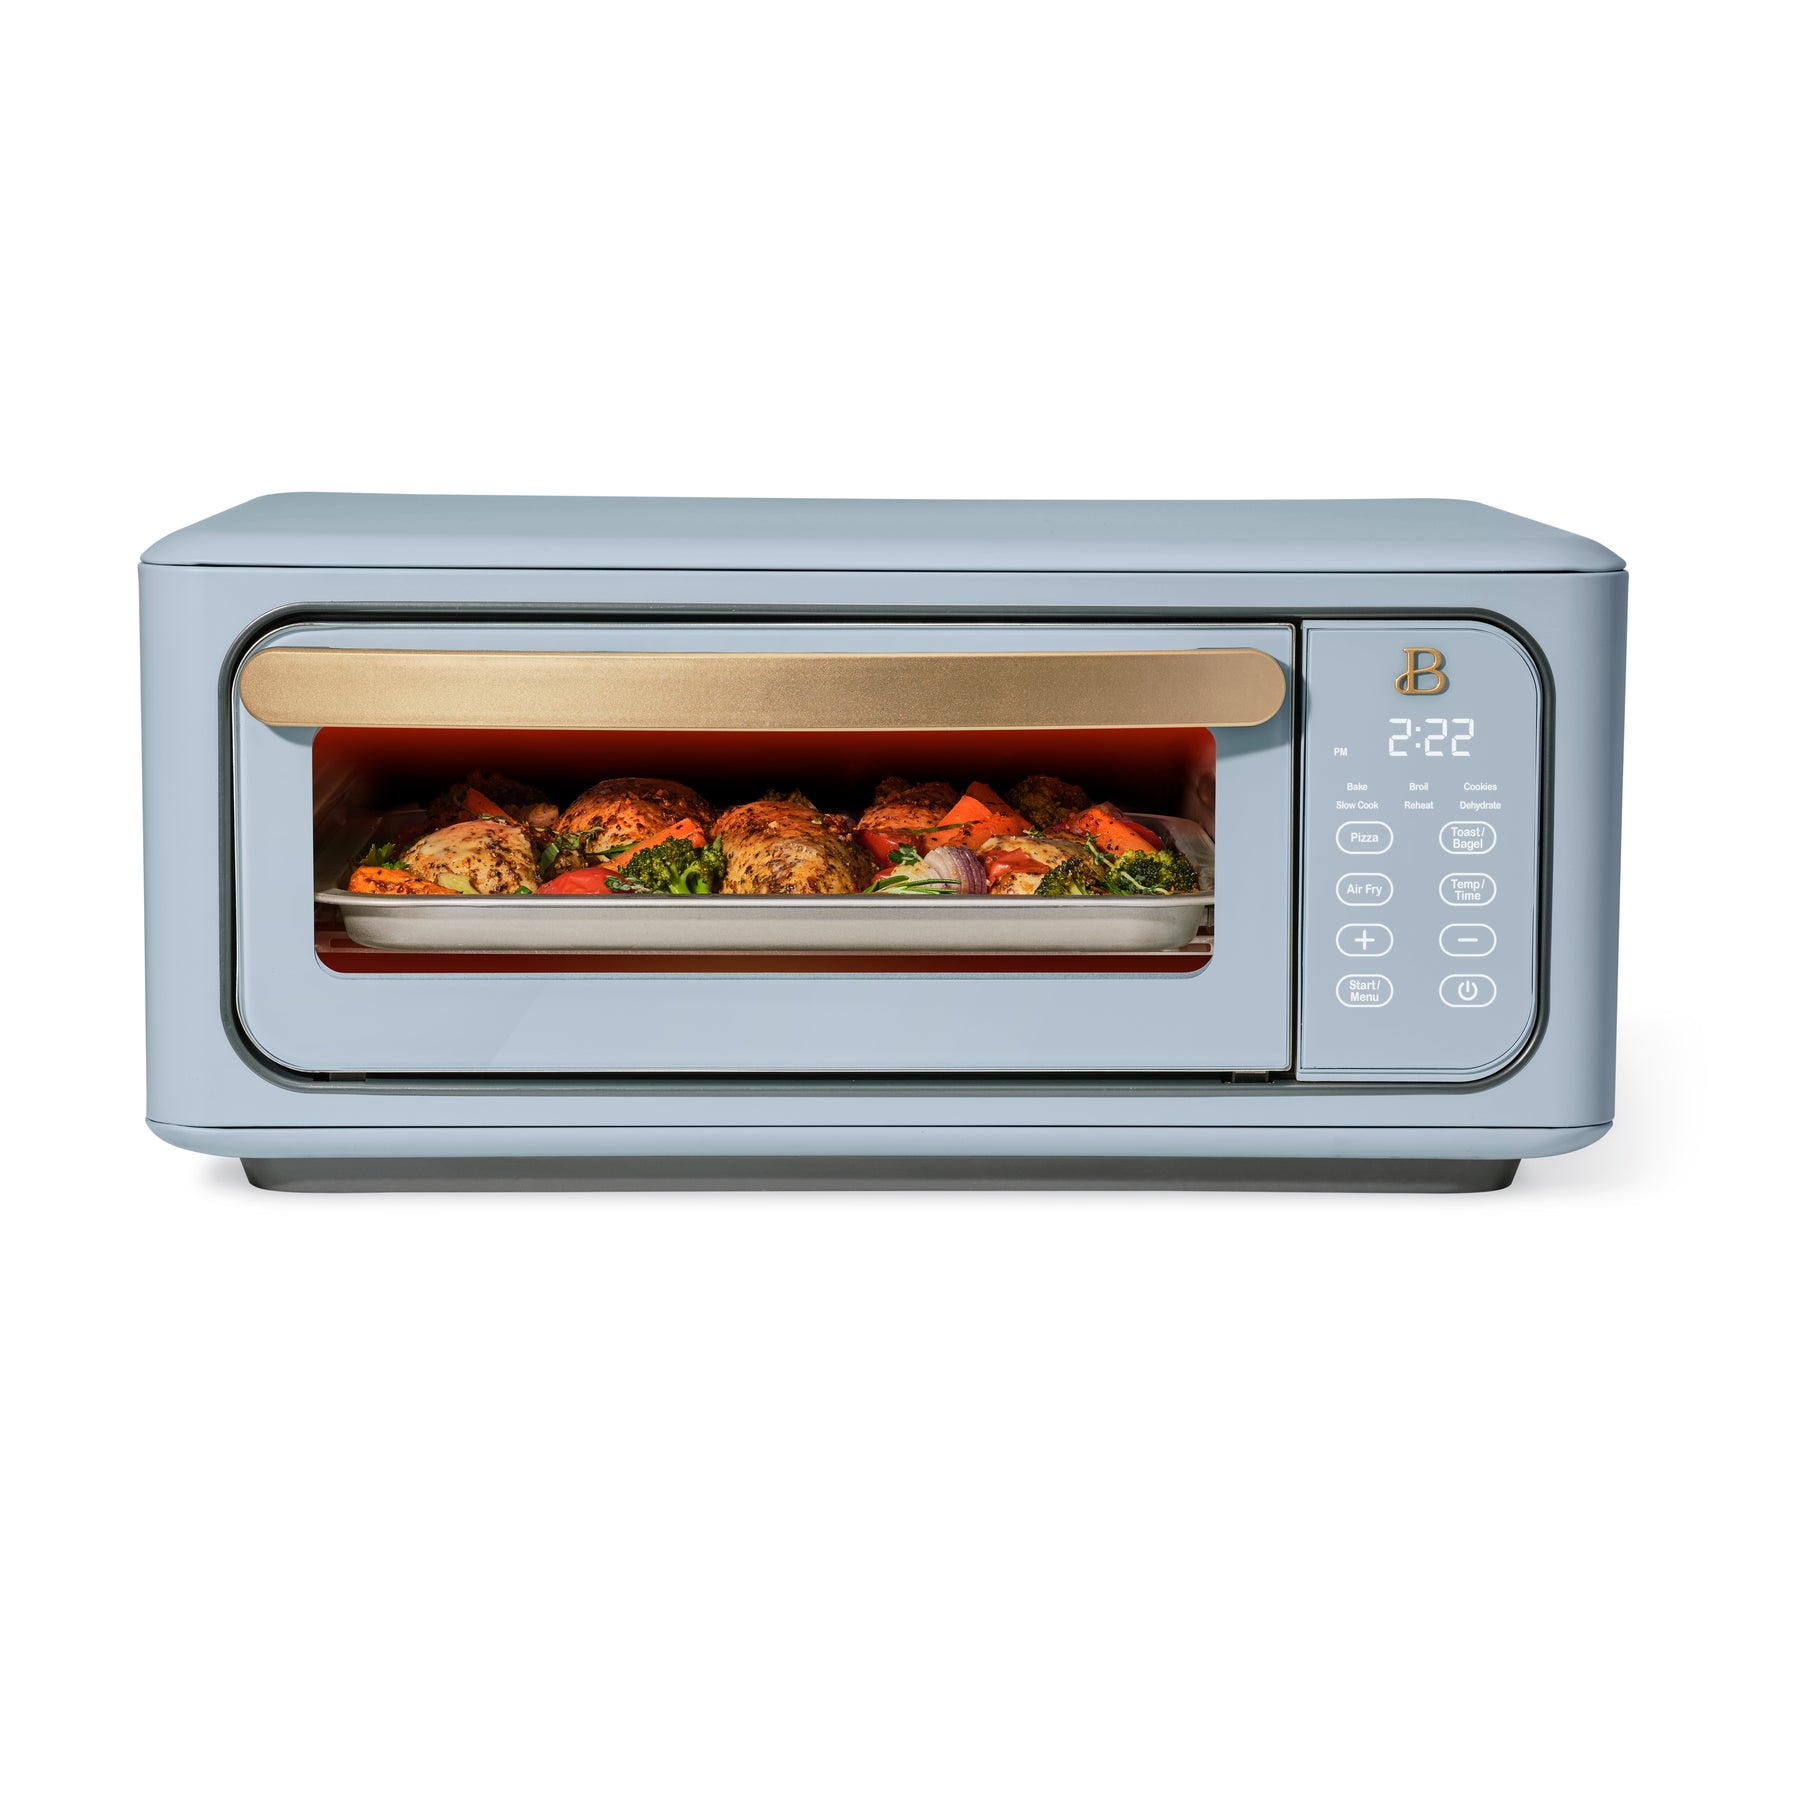 Beautiful 19329 Infrared Air Fry Toaster Oven, 9-Slice, 1800 W, Black Sesame